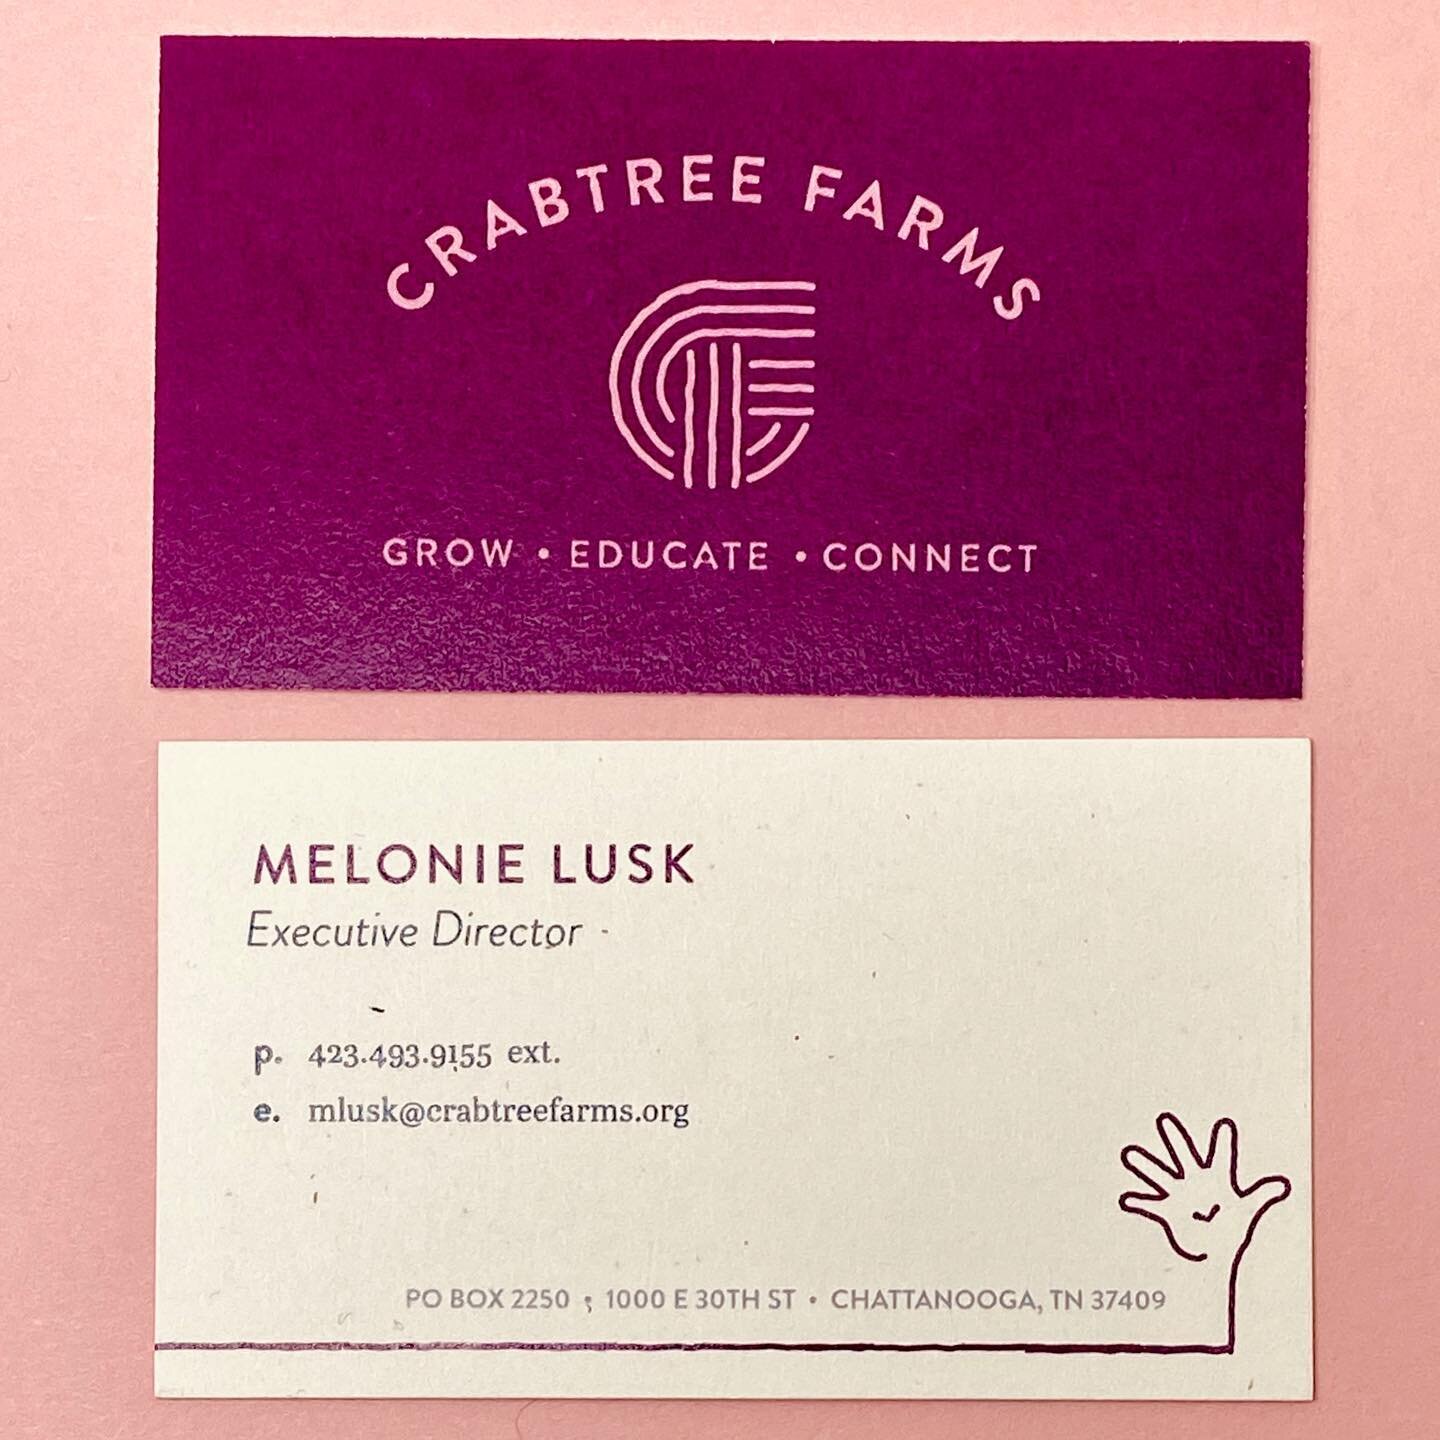 Todays #wpspotlight is ours friends over at @crabtreefarms&rsquo;s lovely business card. Printed 4/4 on #frenchpaper #speckletone #starchwhite. We&rsquo;ve been printing a lot of business cards lately, it&rsquo;s so nice to think about  p h y s i c a